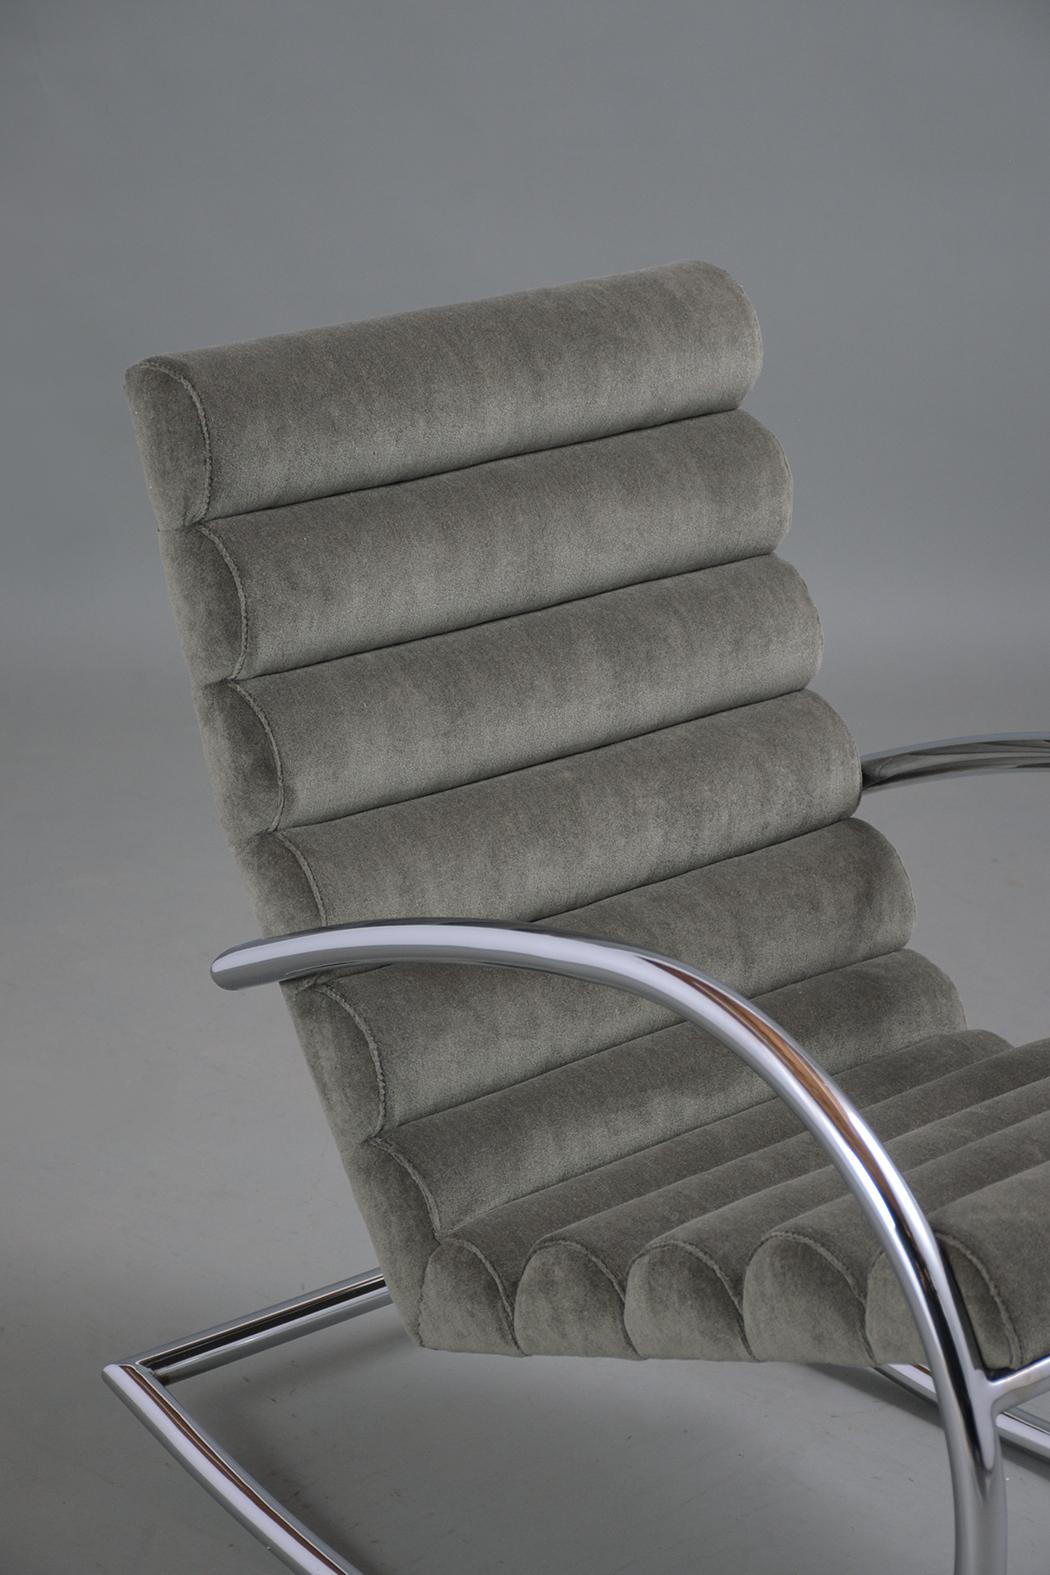 An extraordinary mid-century recliner chair crafted out of steel the chair has been professionally restored and newly reupholstered in a dark grey mohair fabric and new foam inserts with a channeled design. The chair rests on a polished curved